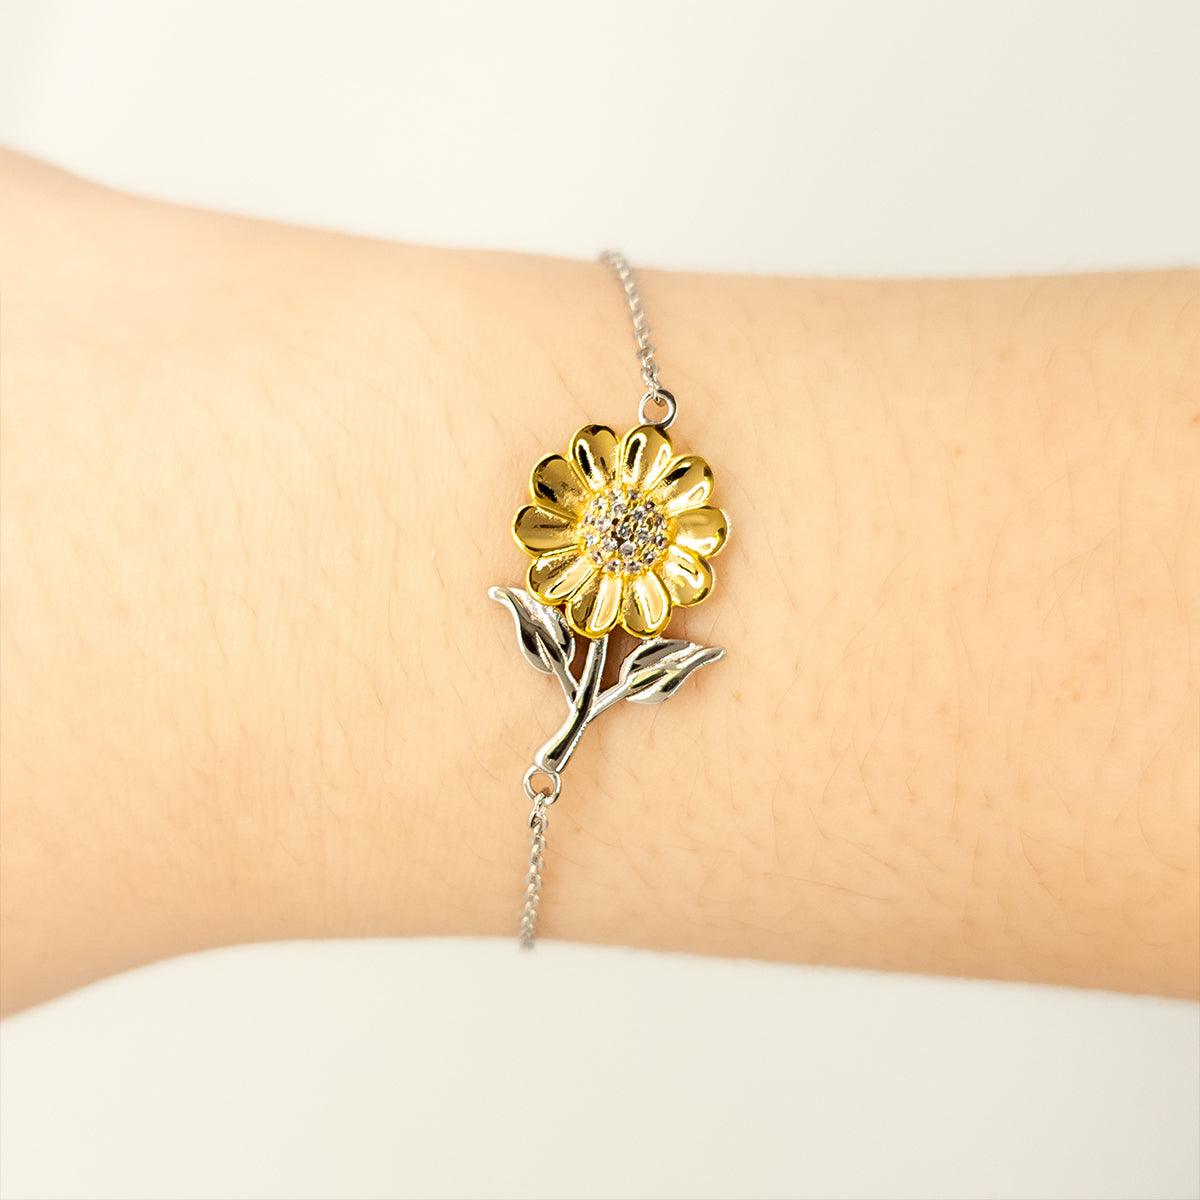 Remarkable Aircraft Mechanic Gifts, Your dedication and hard work, Inspirational Birthday Christmas Unique Sunflower Bracelet For Aircraft Mechanic, Coworkers, Men, Women, Friends - Mallard Moon Gift Shop